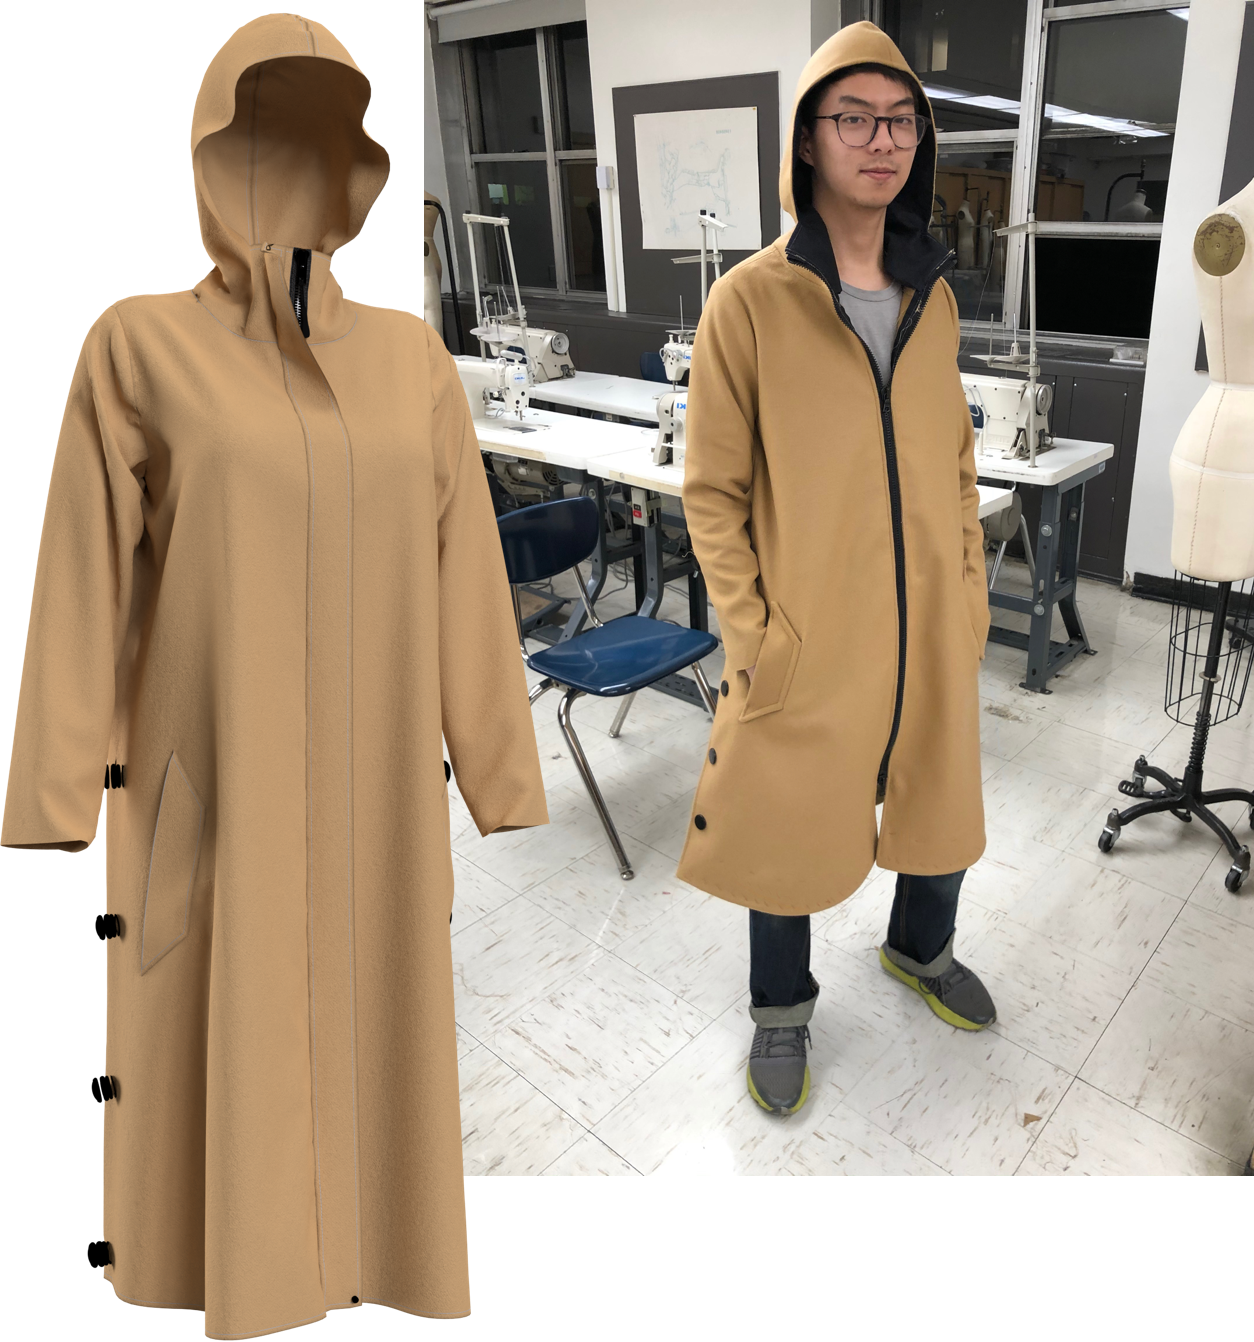 Final outcome of 3D virtual prototype and physical garment side by side.